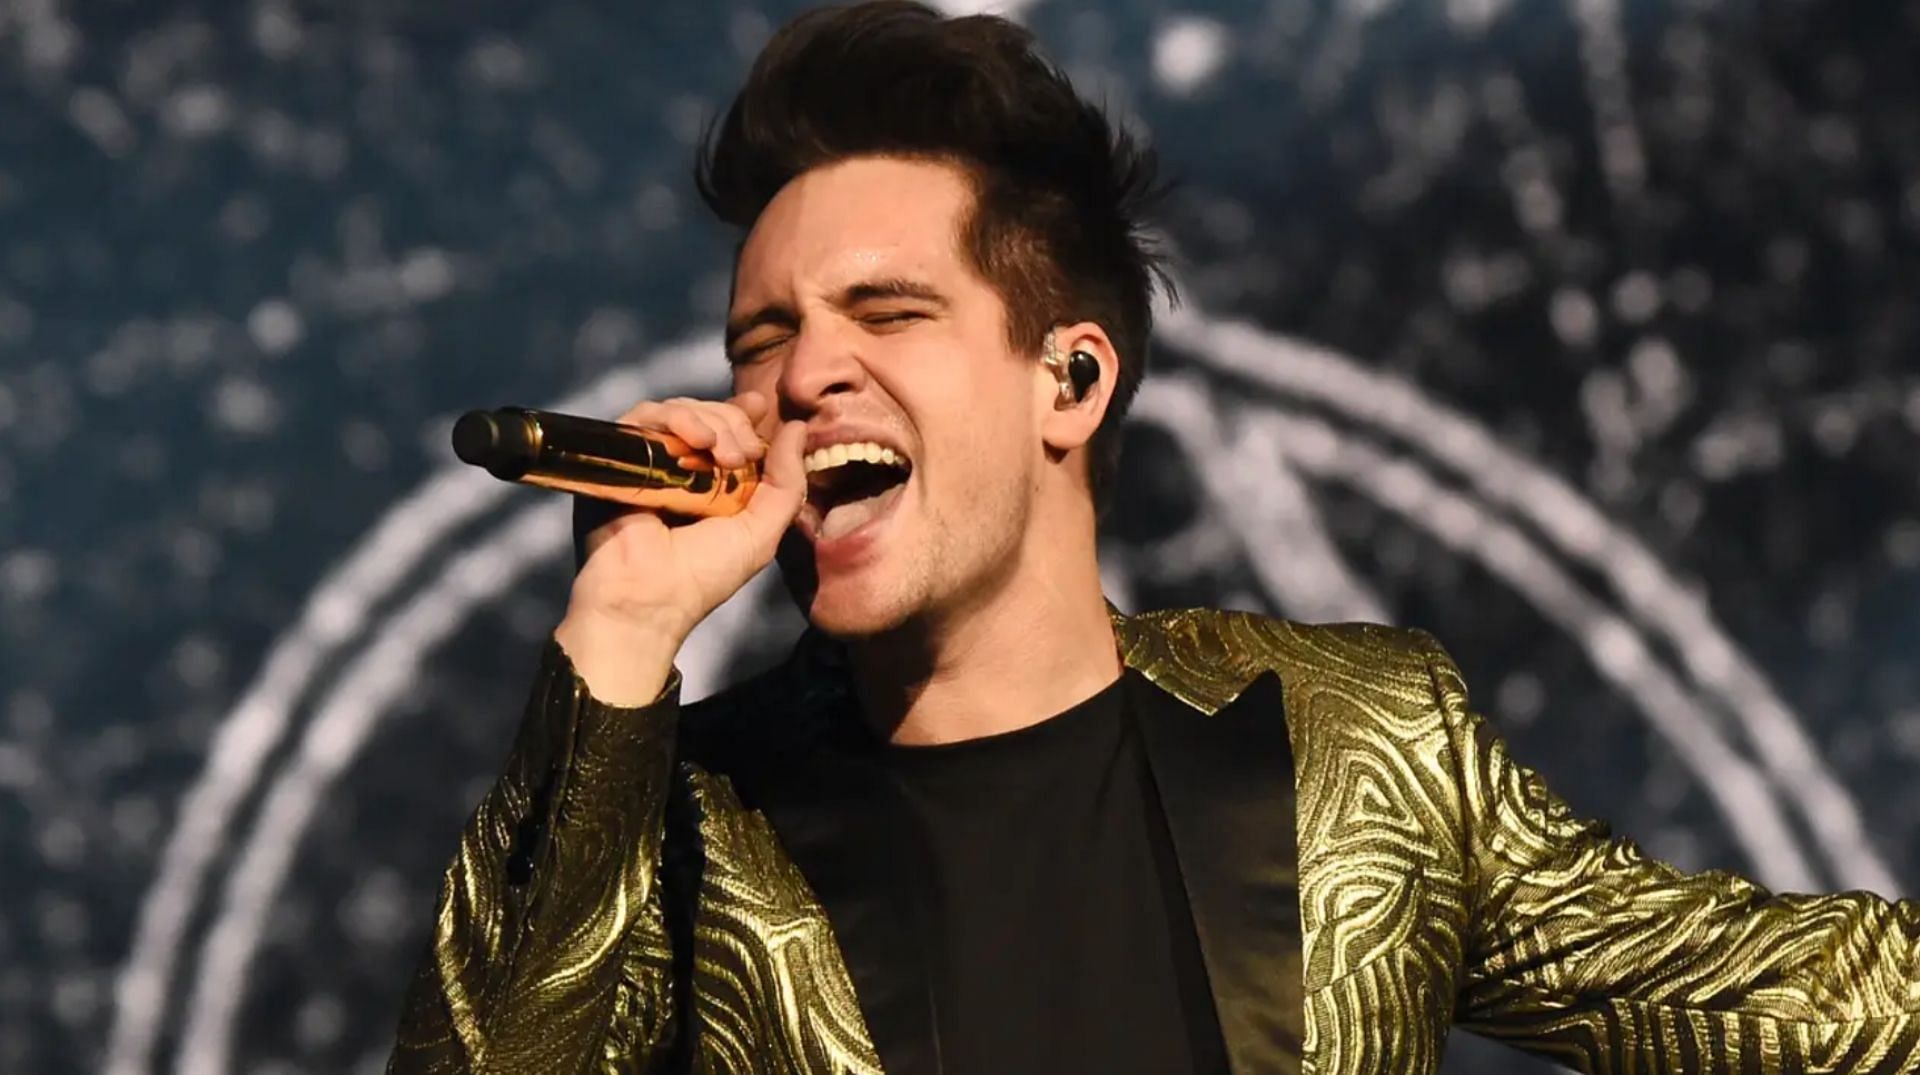 Panic! at the Disco is scheduled to start the tour in September, 2022. (Image via Getty)